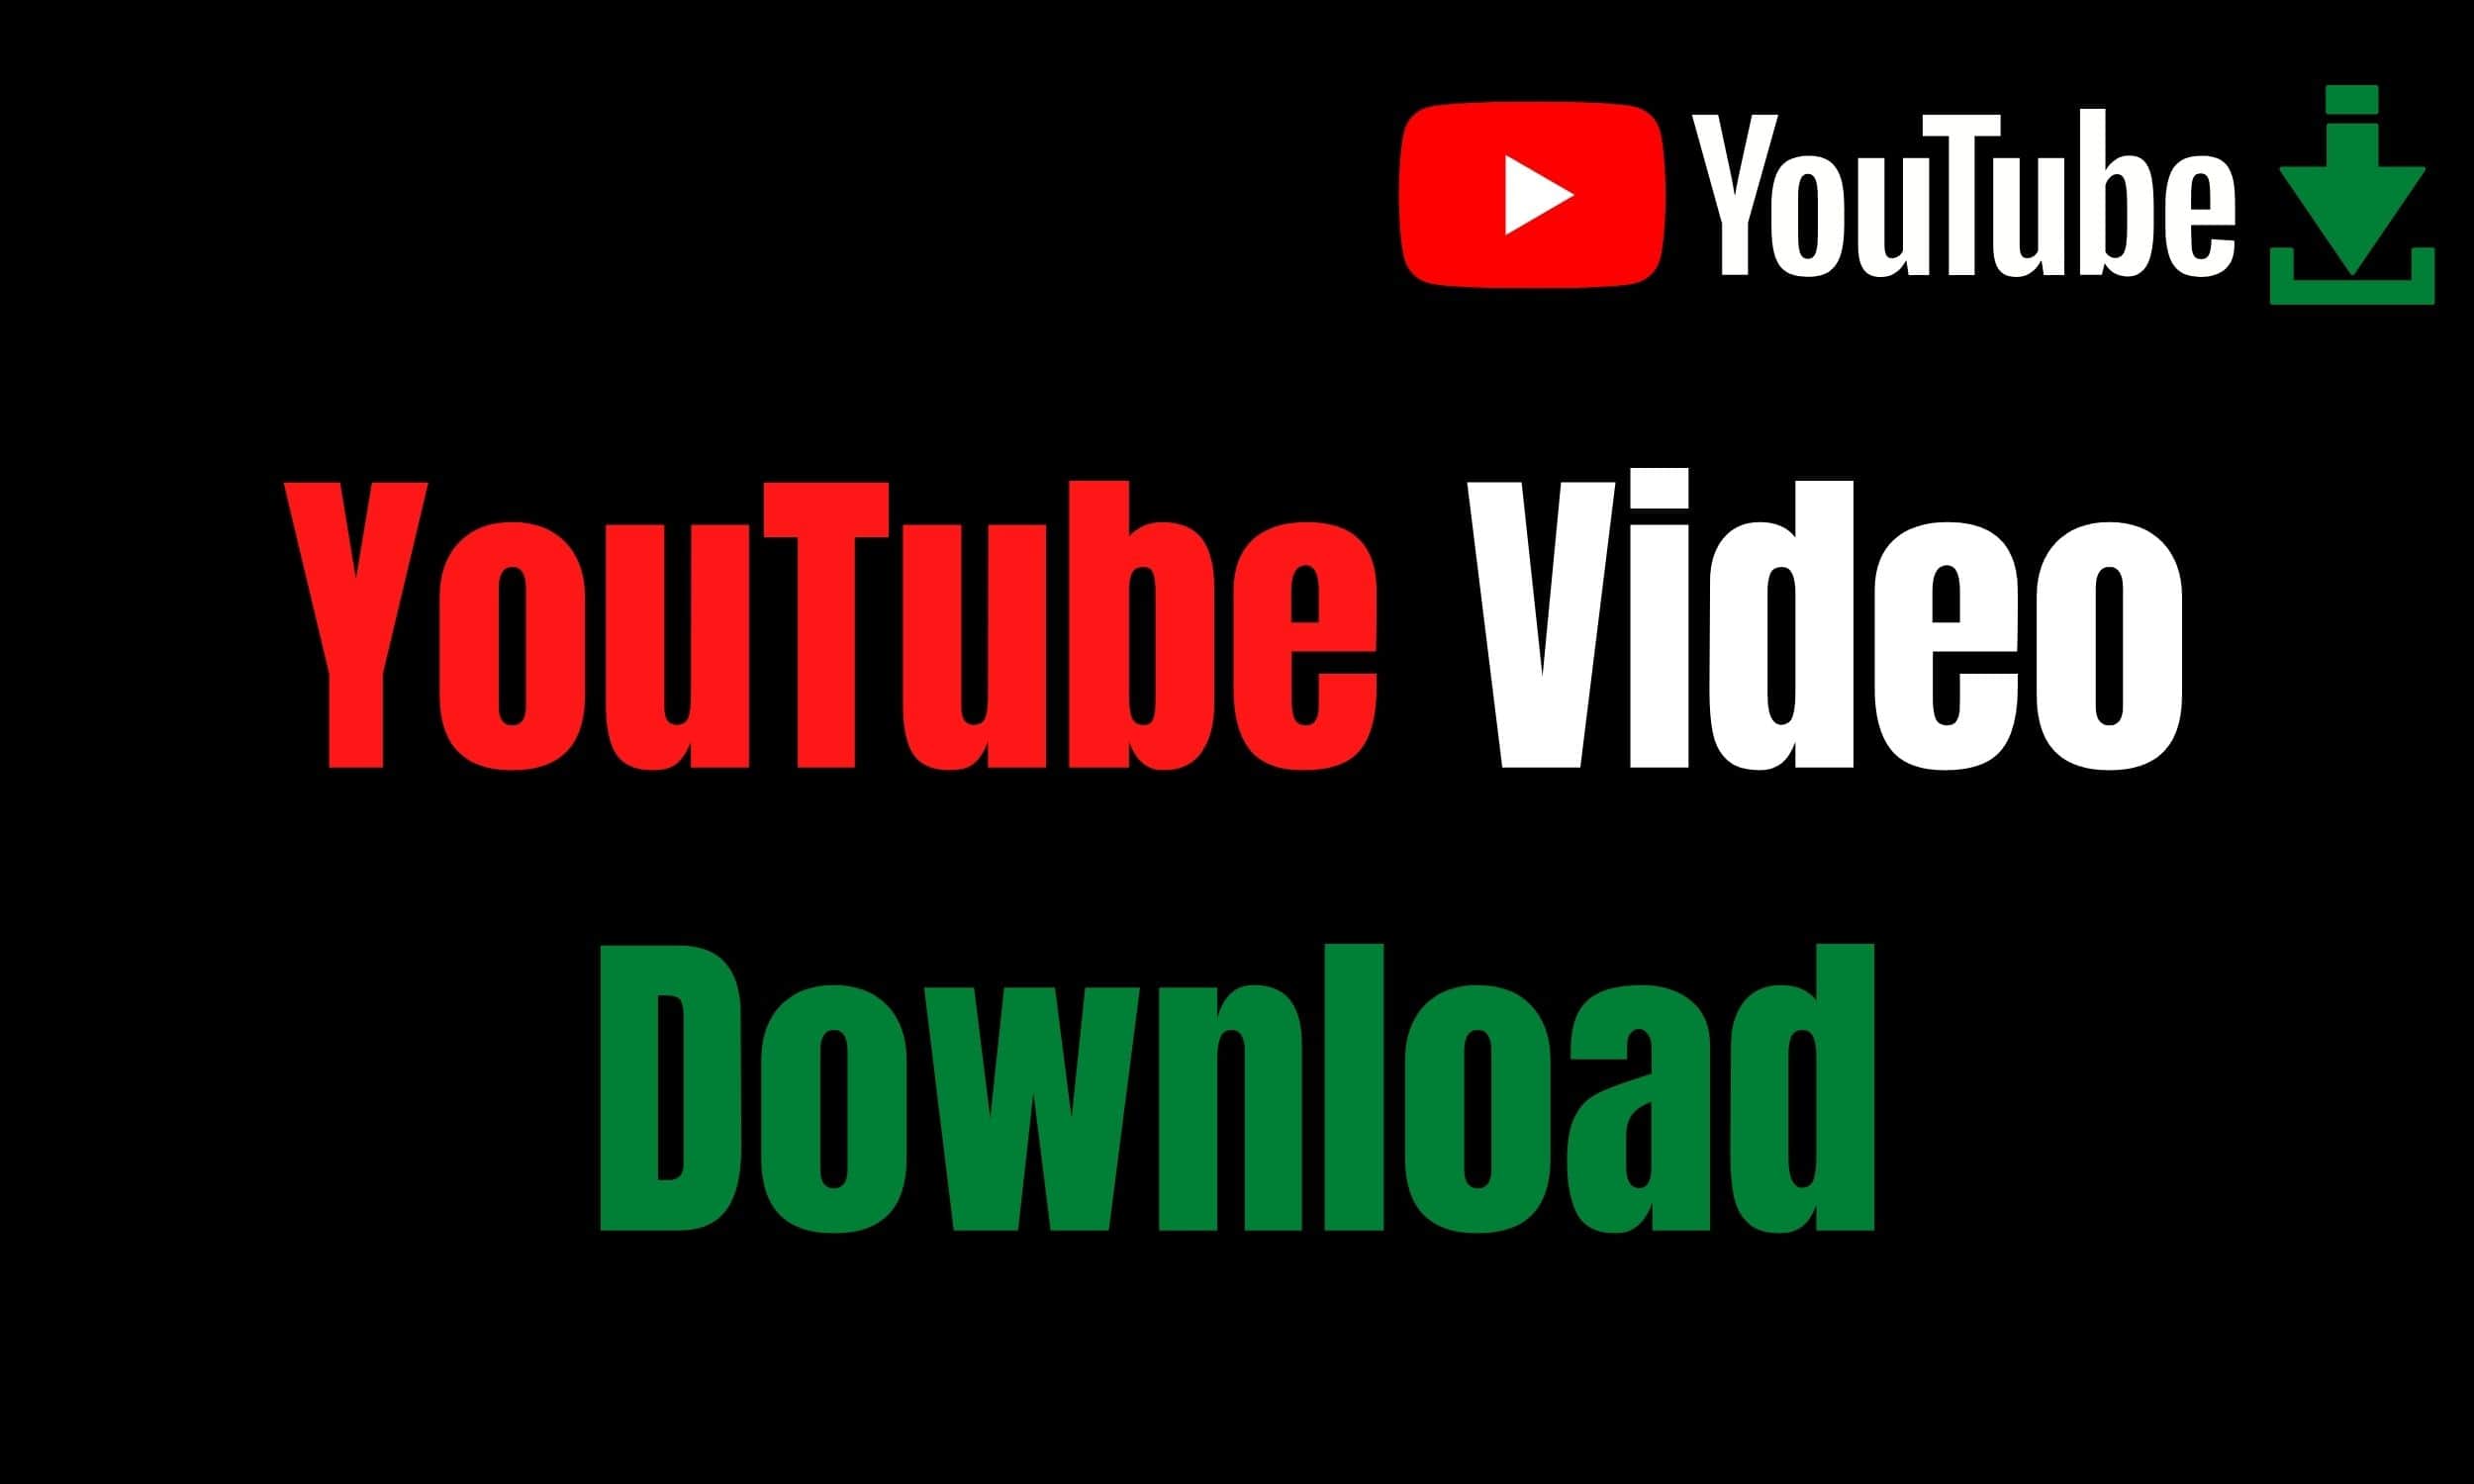 Download YouTube Videos as MP4 Files Easily